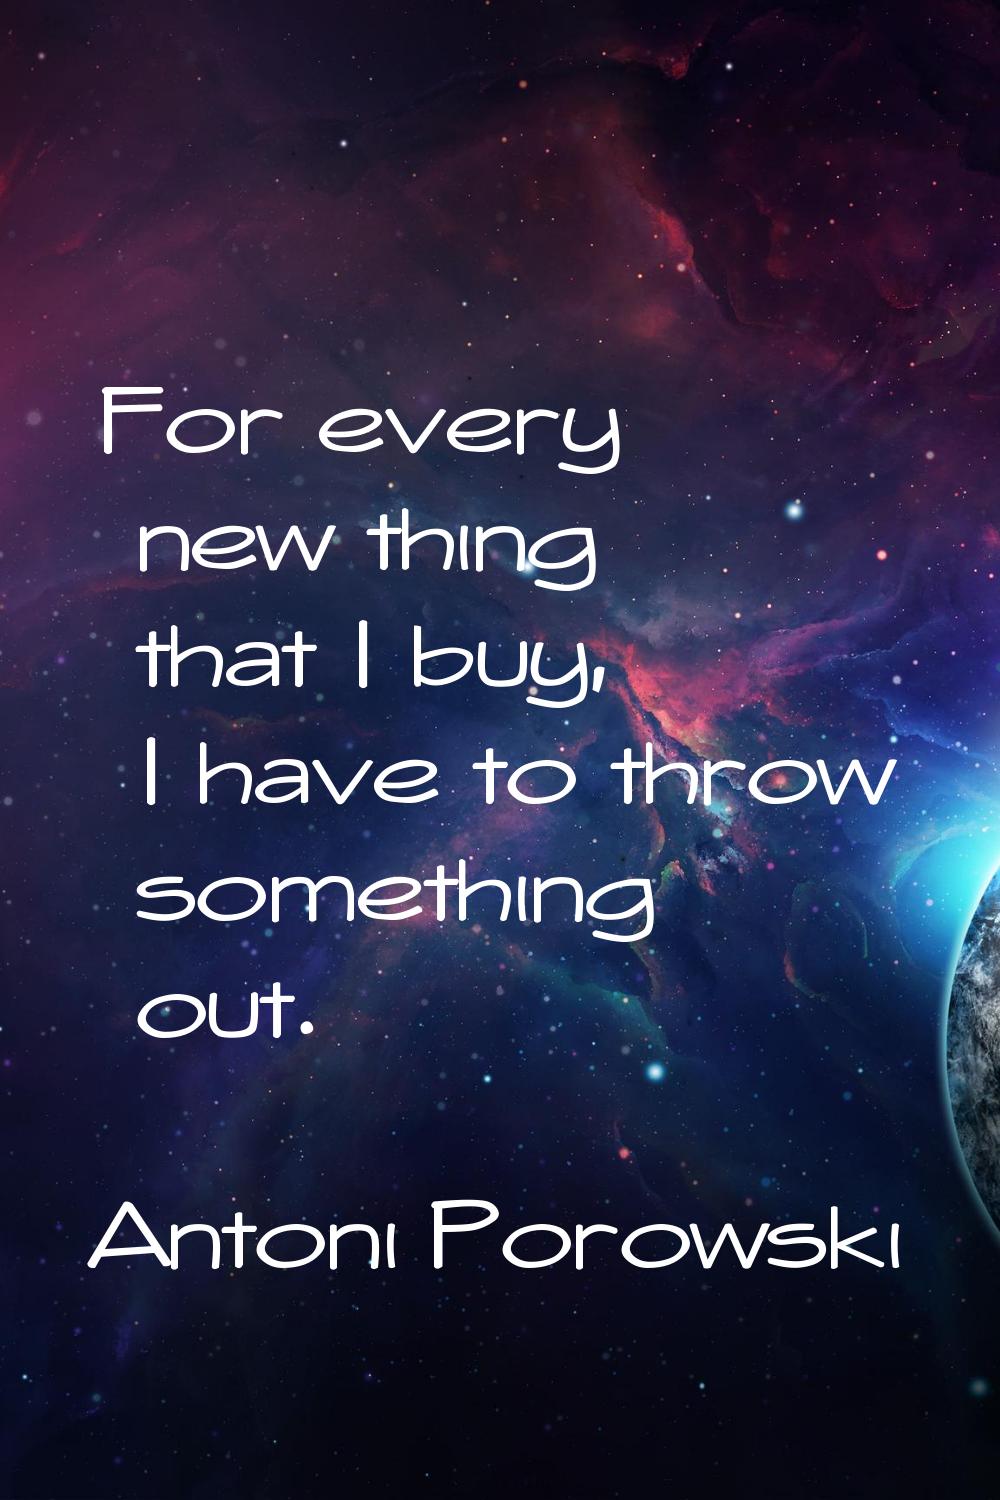 For every new thing that I buy, I have to throw something out.